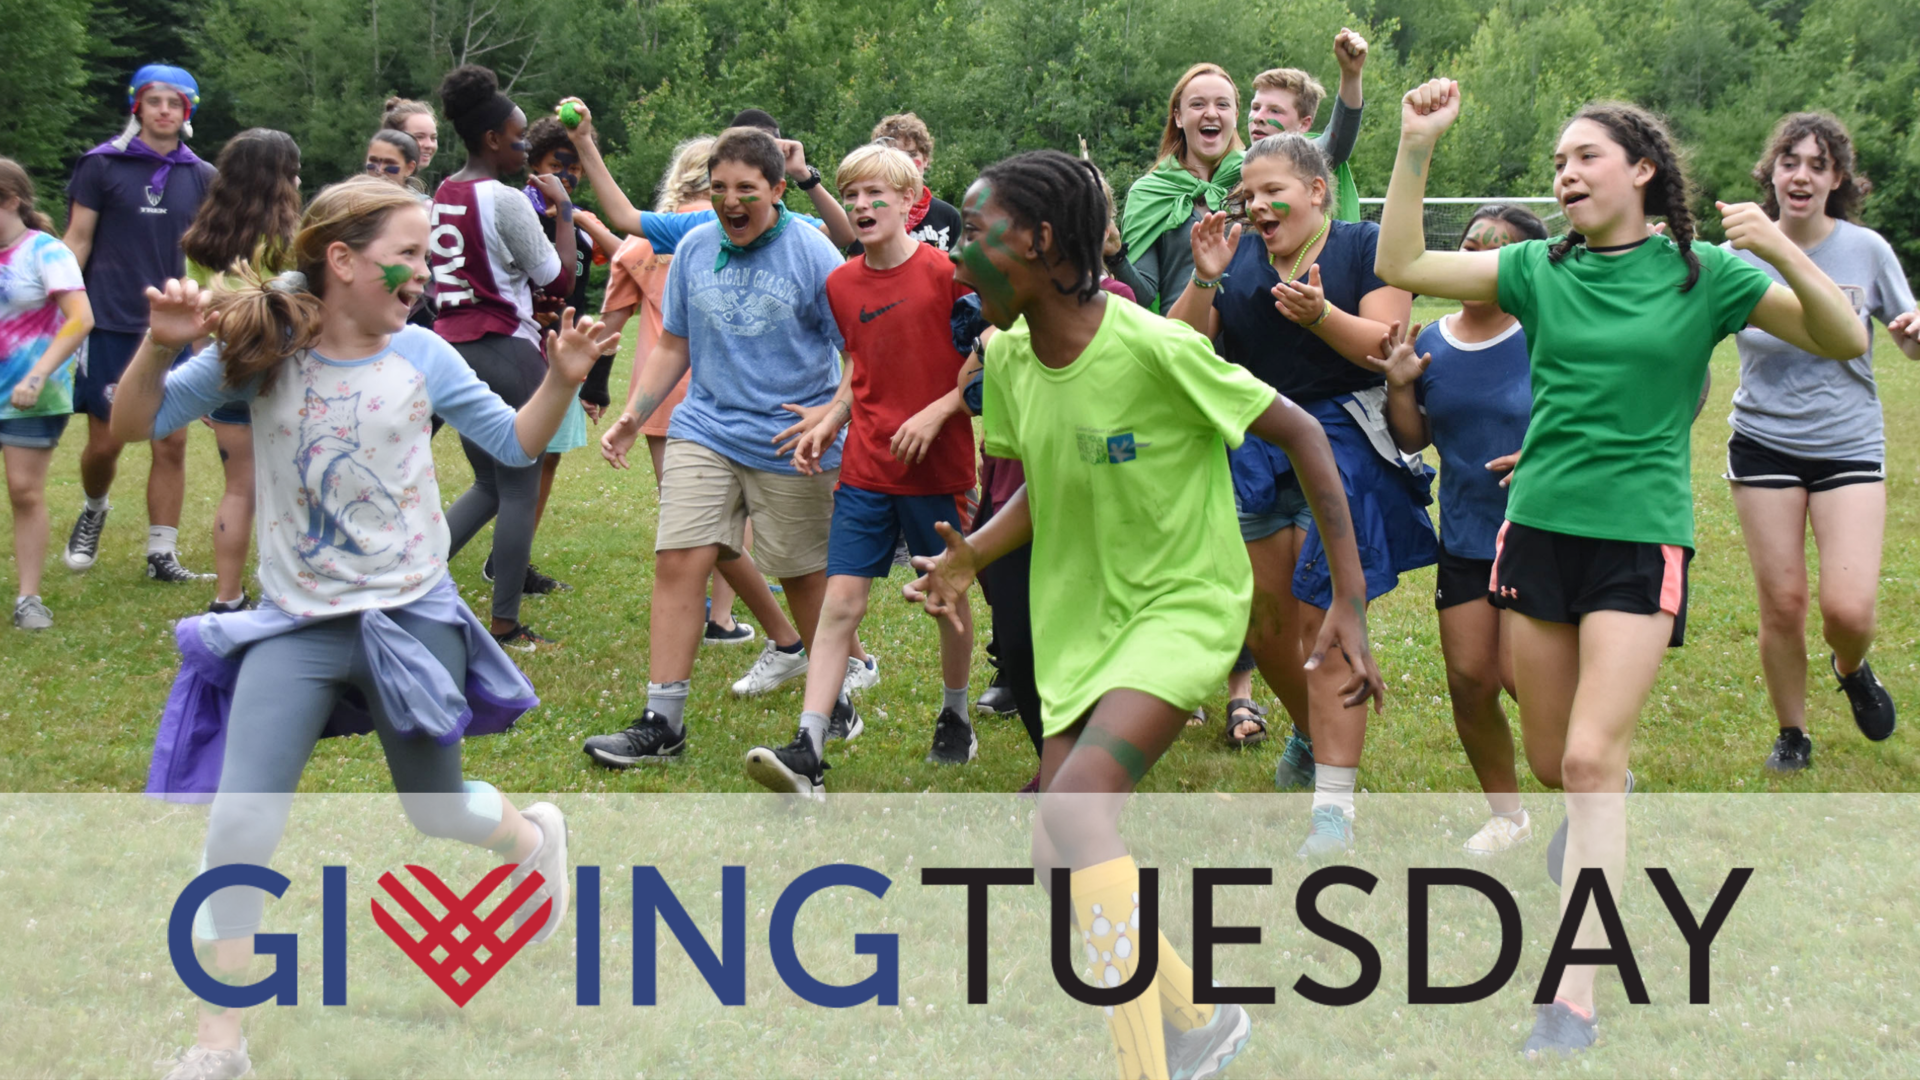 kids running with a giving tuesday logo